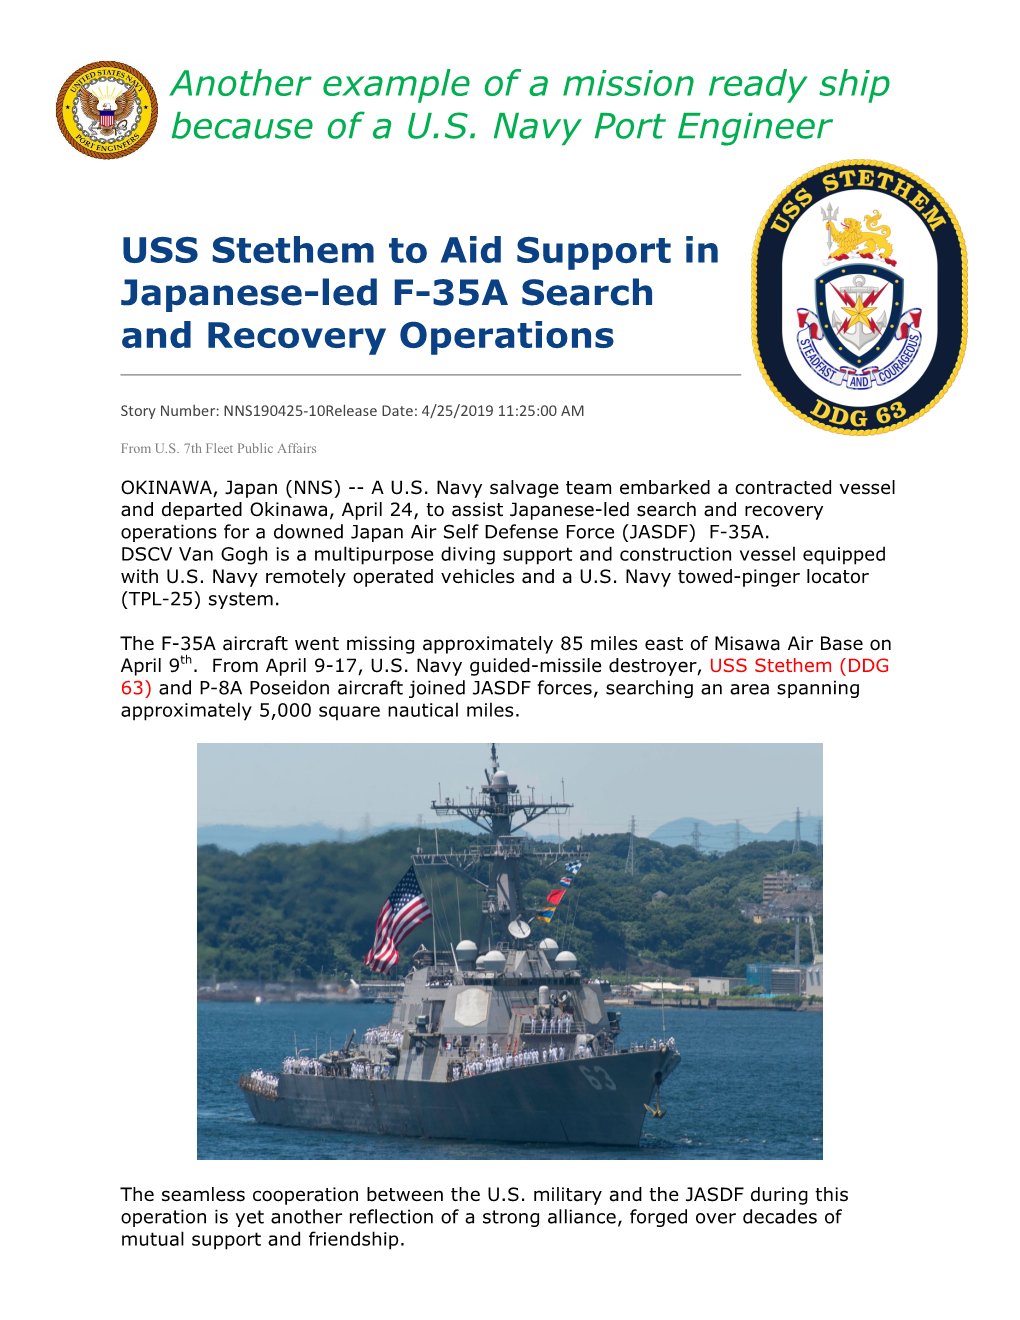 USS Stethem to Aid Support in Japanese-Led F-35A Search and Recovery Operations